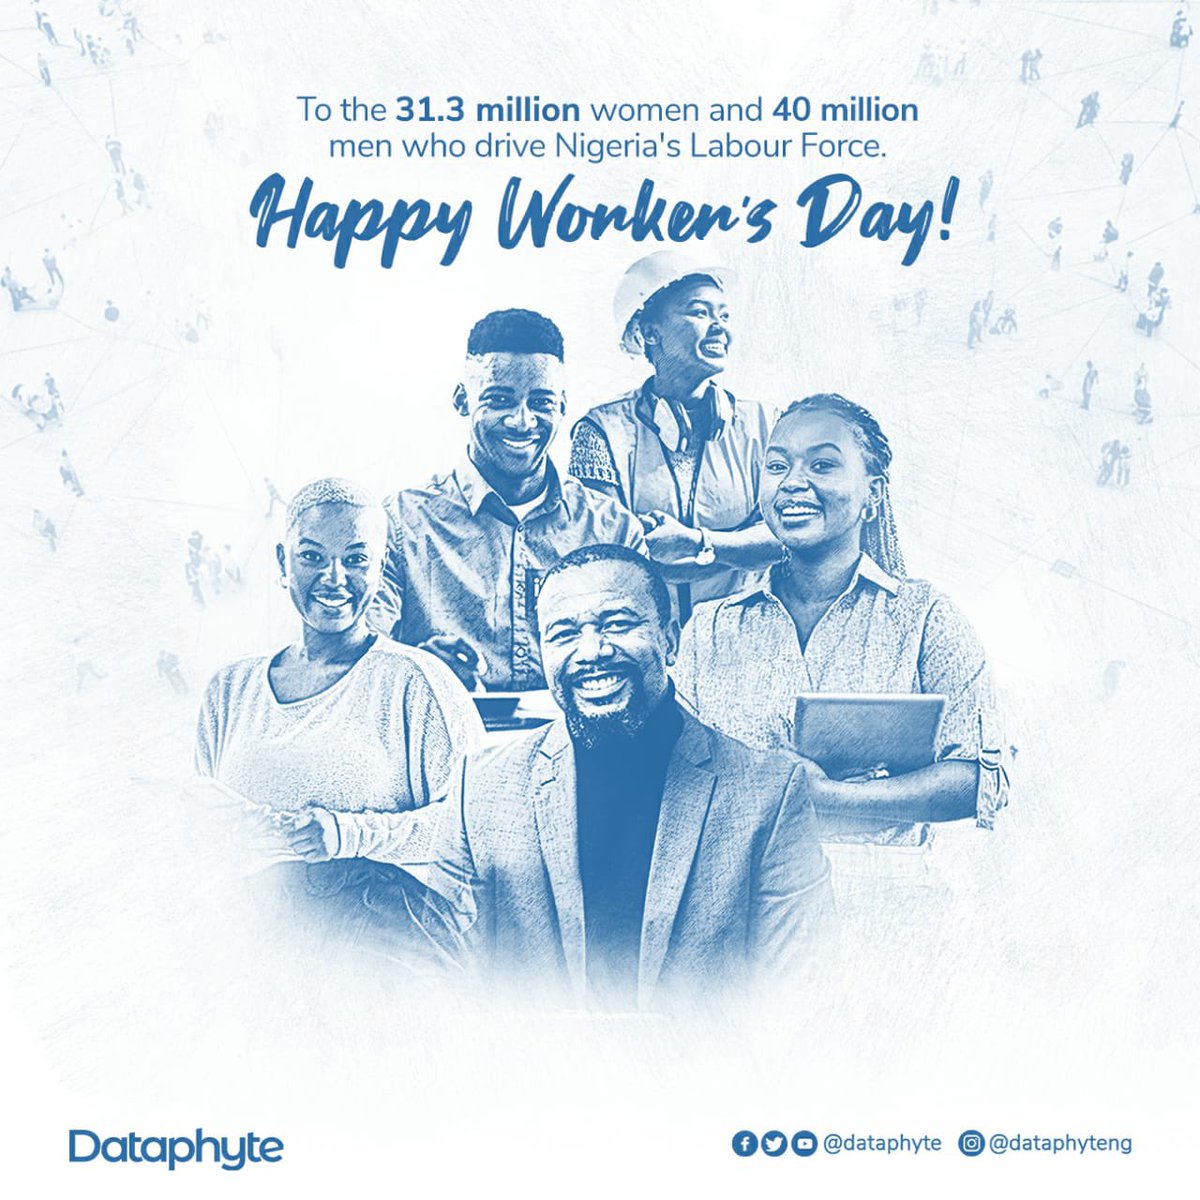 Today, we celebrate the backbone of Nigeria's workforce – the 31.3 million incredible women and 40 million amazing men who pour their hearts into every task, every day, shaping their families, communities, and our nation. Thank you for your invaluable contributions to our…